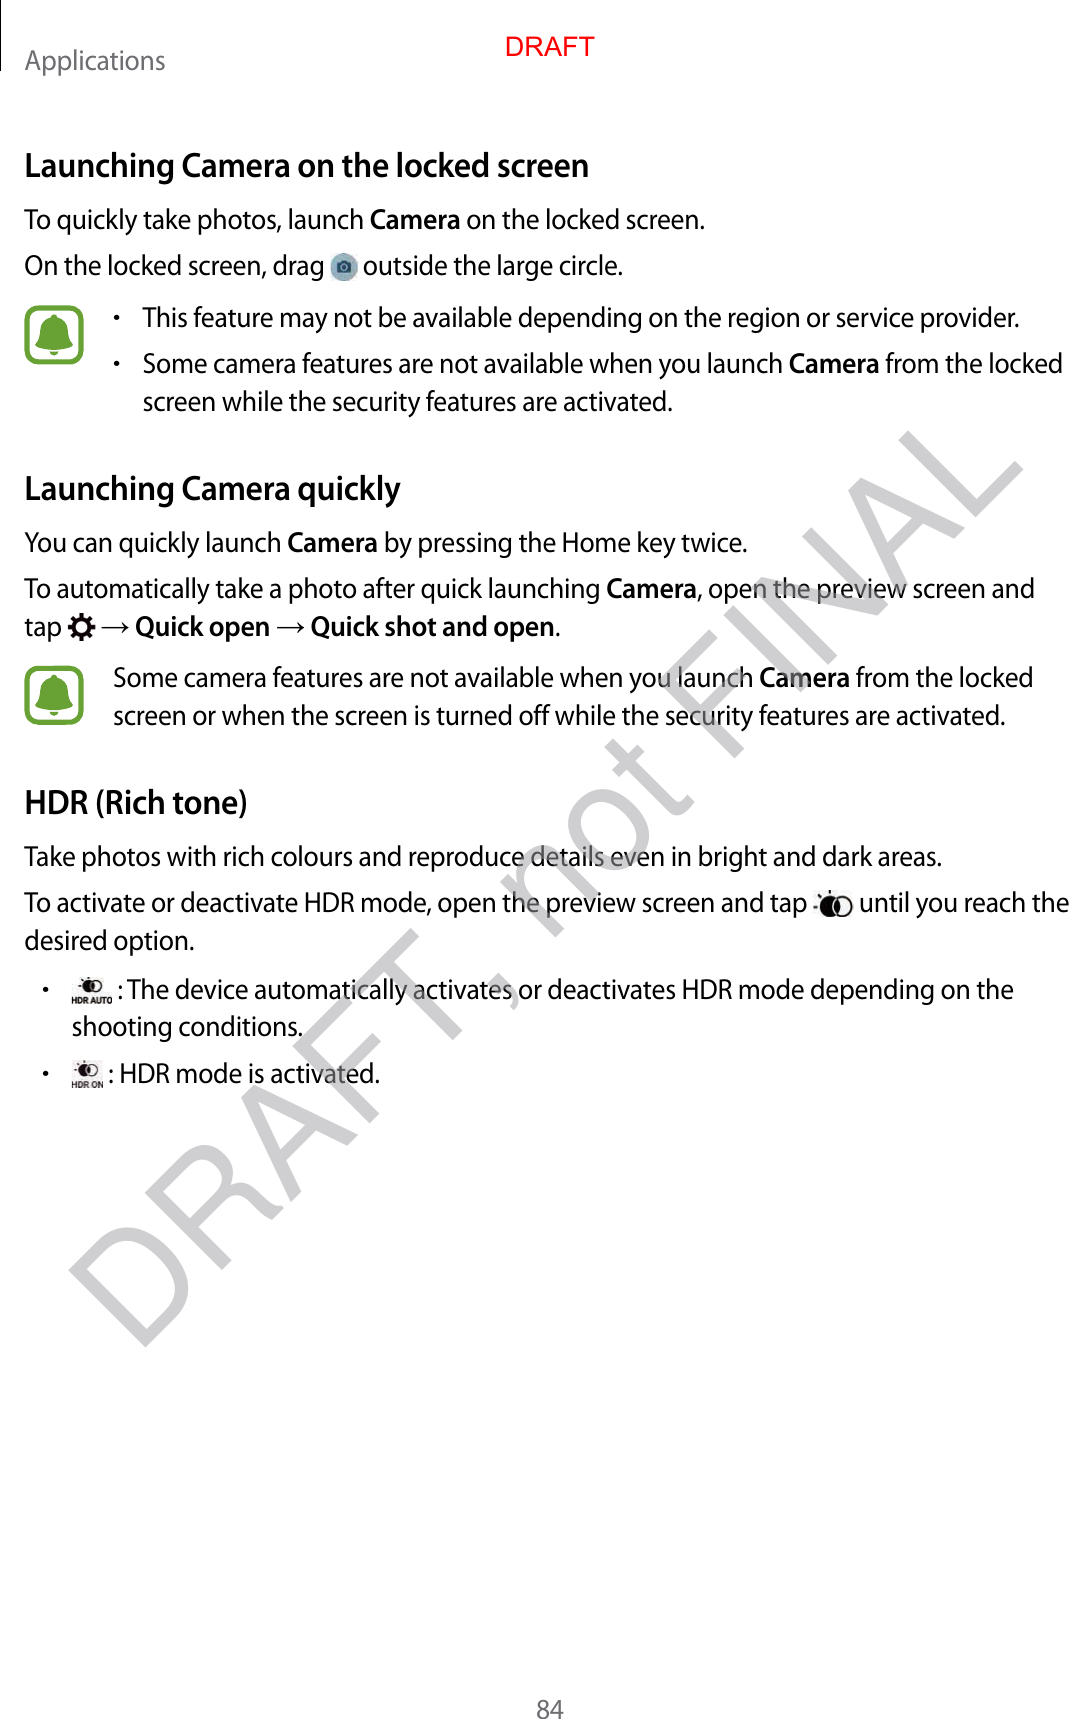 Applications84Launching Camera on the locked screenTo quickly take photos, launch Camera on the locked screen.On the locked screen, drag   outside the large circle.•This feature may not be available depending on the region or service provider.•Some camera features are not available when you launch Camera from the locked screen while the security features are activated.Launching Camera quicklyYou can quickly launch Camera by pressing the Home key twice.To automatically take a photo after quick launching Camera, open the preview screen and tap    Quick open  Quick shot and open.Some camera features are not available when you launch Camera from the locked screen or when the screen is turned off while the security features are activated.HDR (Rich tone)Take photos with rich colours and reproduce details even in bright and dark areas.To activate or deactivate HDR mode, open the preview screen and tap   until you reach the desired option.• : The device automatically activates or deactivates HDR mode depending on the shooting conditions.• : HDR mode is activated.DRAFTDRAFT, not FINAL